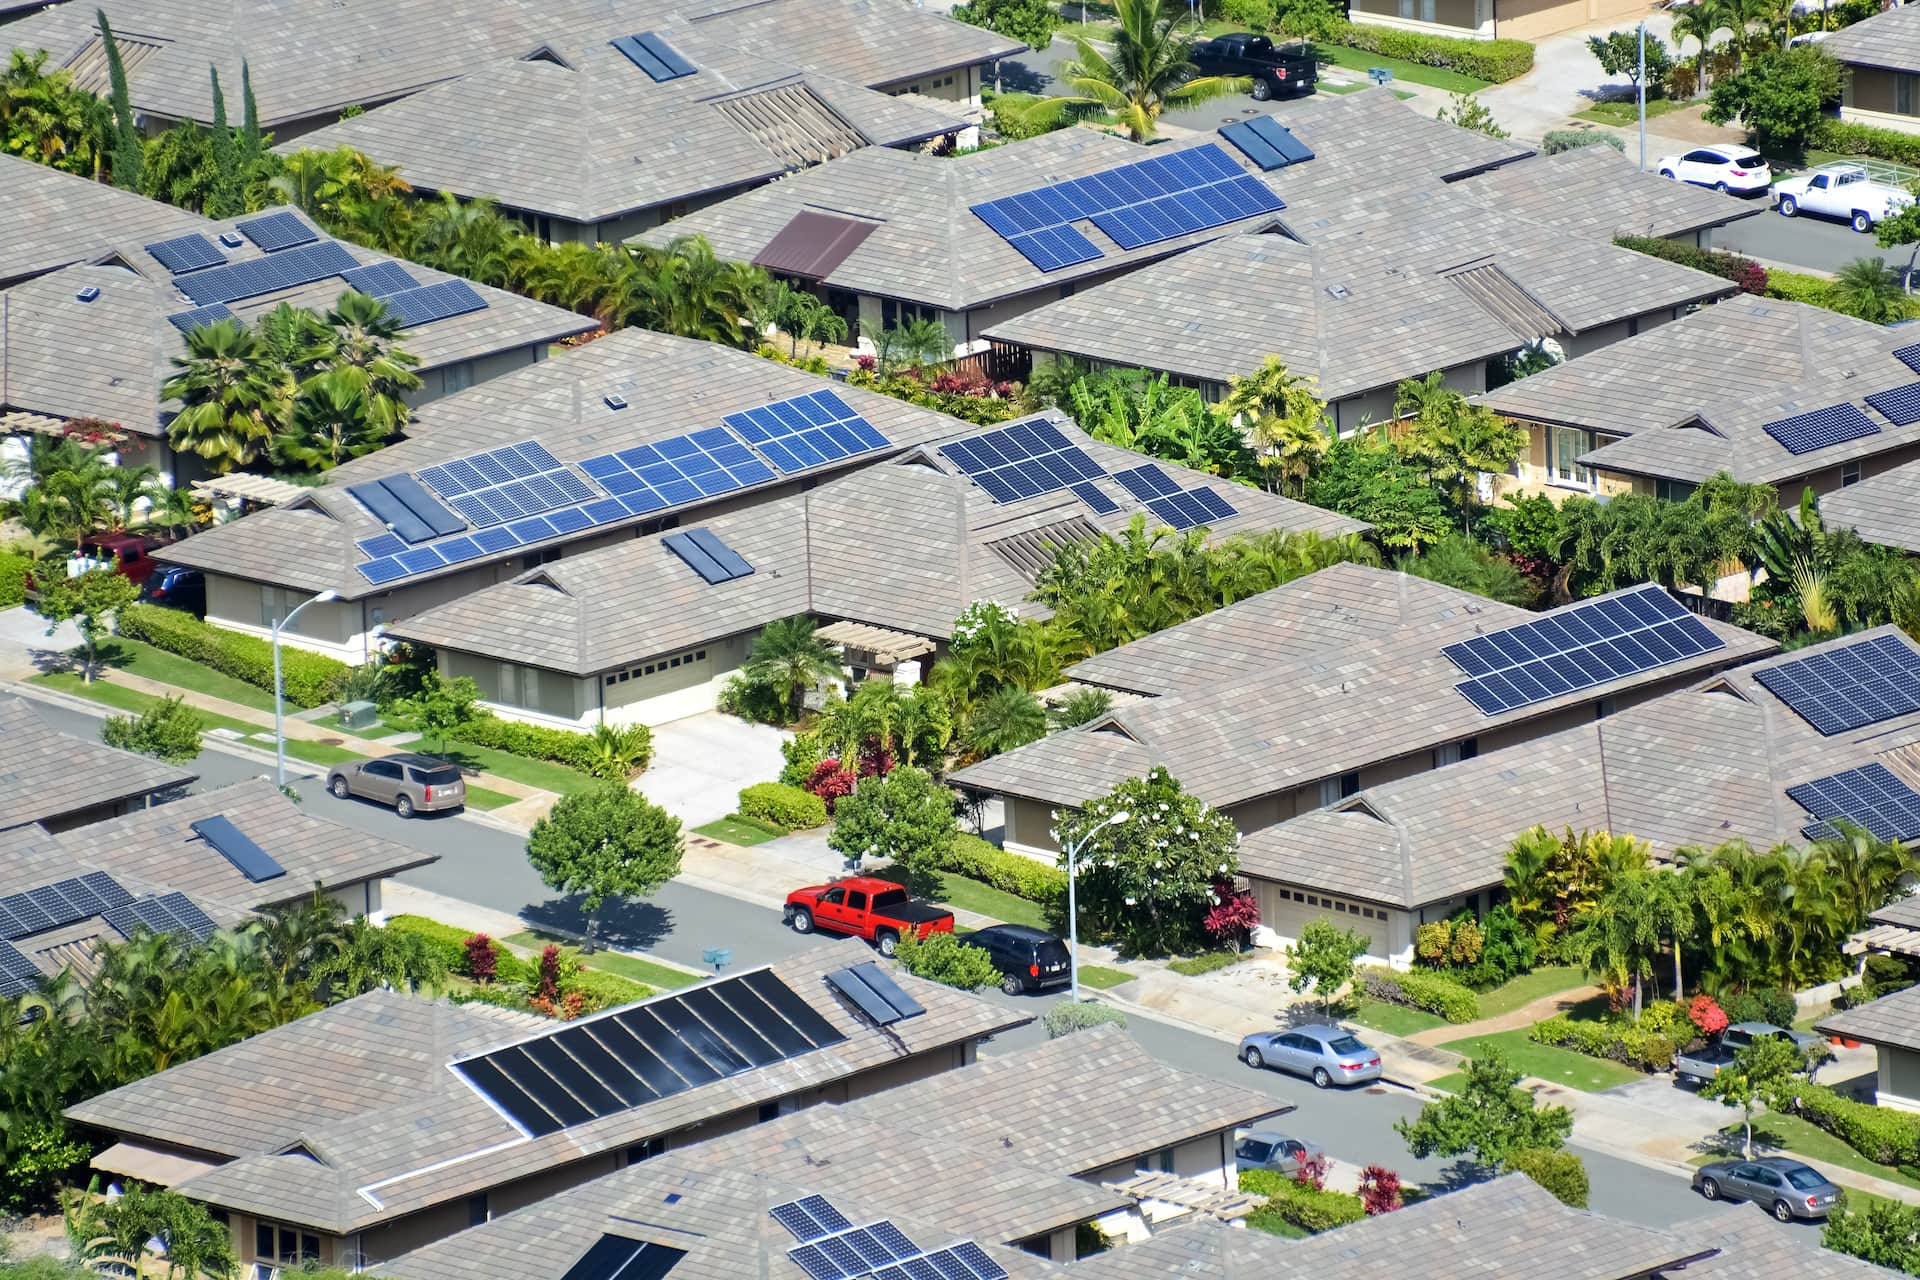 Aerial view of sub-urban neighborhood with solar panels on the roofs